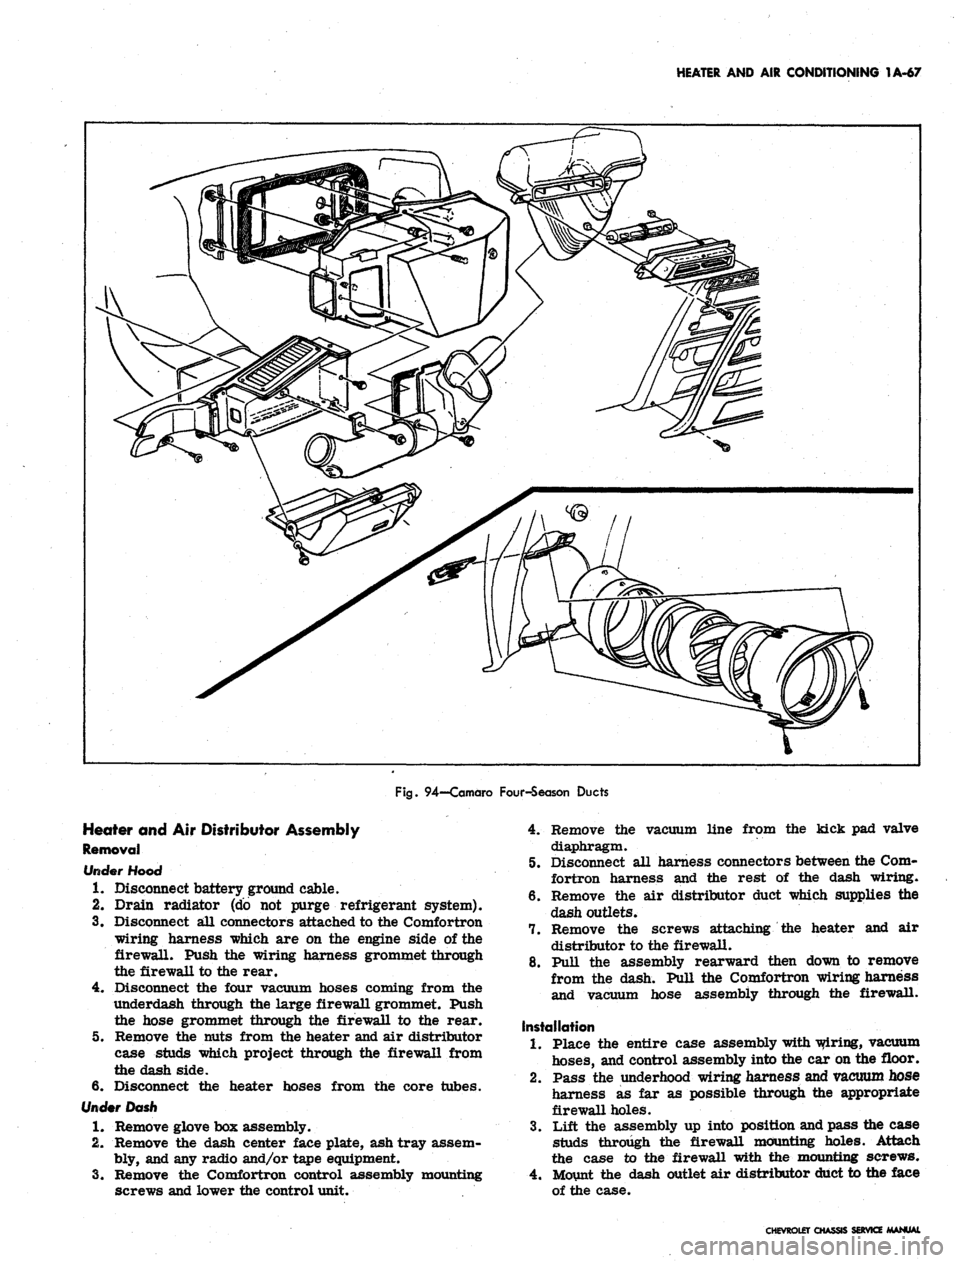 CHEVROLET CAMARO 1967 1.G Chassis Service Manual 
HEATER AND AIR CONDITIONING 1A-67

Fig.
 94—Camaro Four-Season Ducts

Heater and Air Distributor Assembly

Removal

rfooo

1.
 Disconnect battery ground cable.

2.
 Drain radiator (do not purge ref